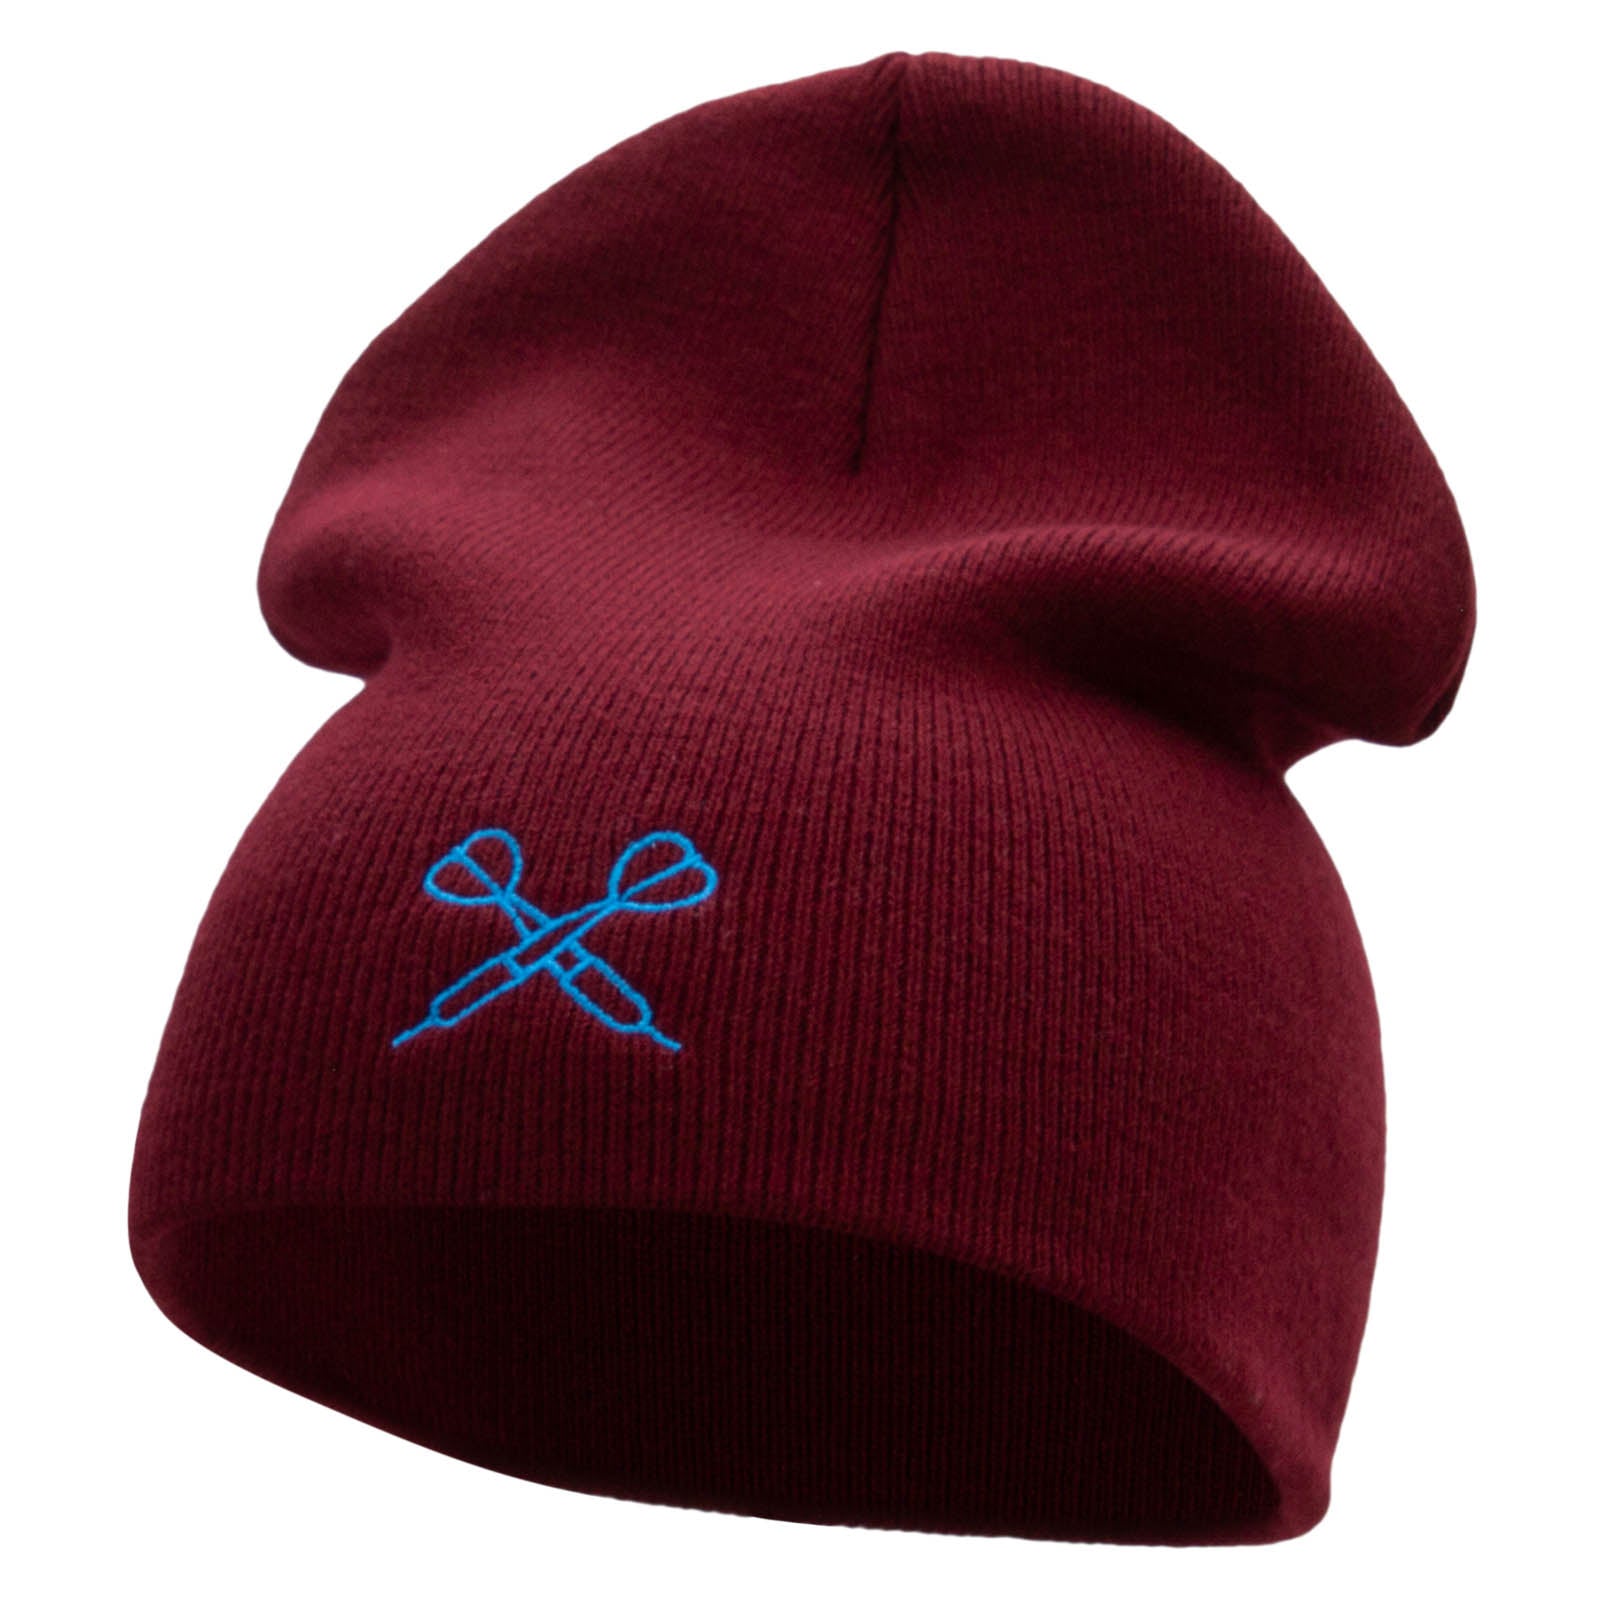 The Dual Darts Embroidered 8 Inch Short Beanie Made in USA - Burgundy OSFM